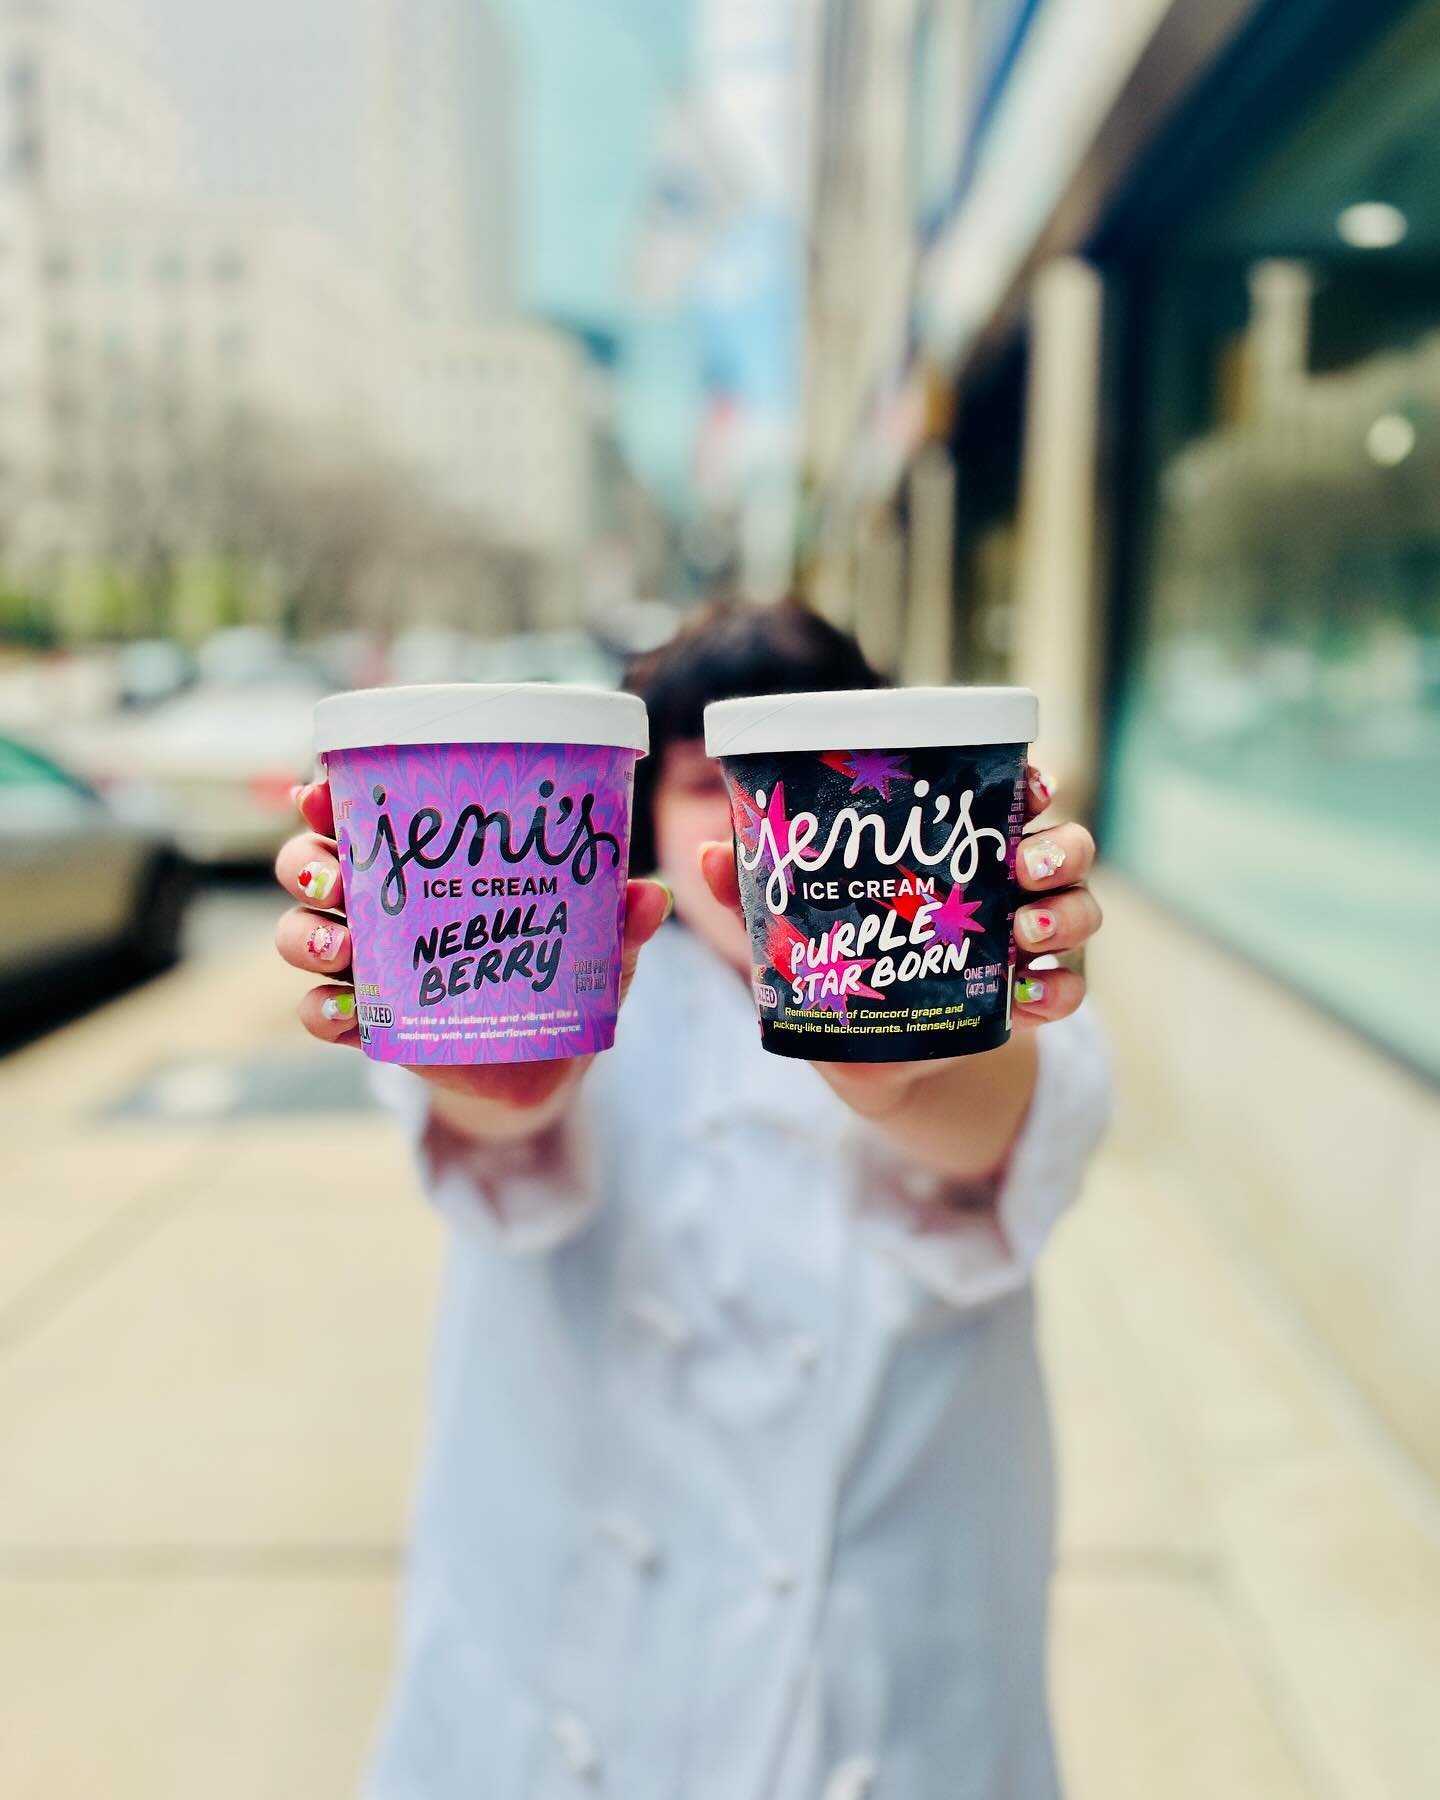 These new @jenisicecreams flavors are out of this world&hellip;.come on in and take a trip, the water&rsquo;s fine but the ice cream is better. 

#jenisicecream #punkstargonaut #bostonfoodies #baccogram #gottagotobaccos #wescreamforicecream